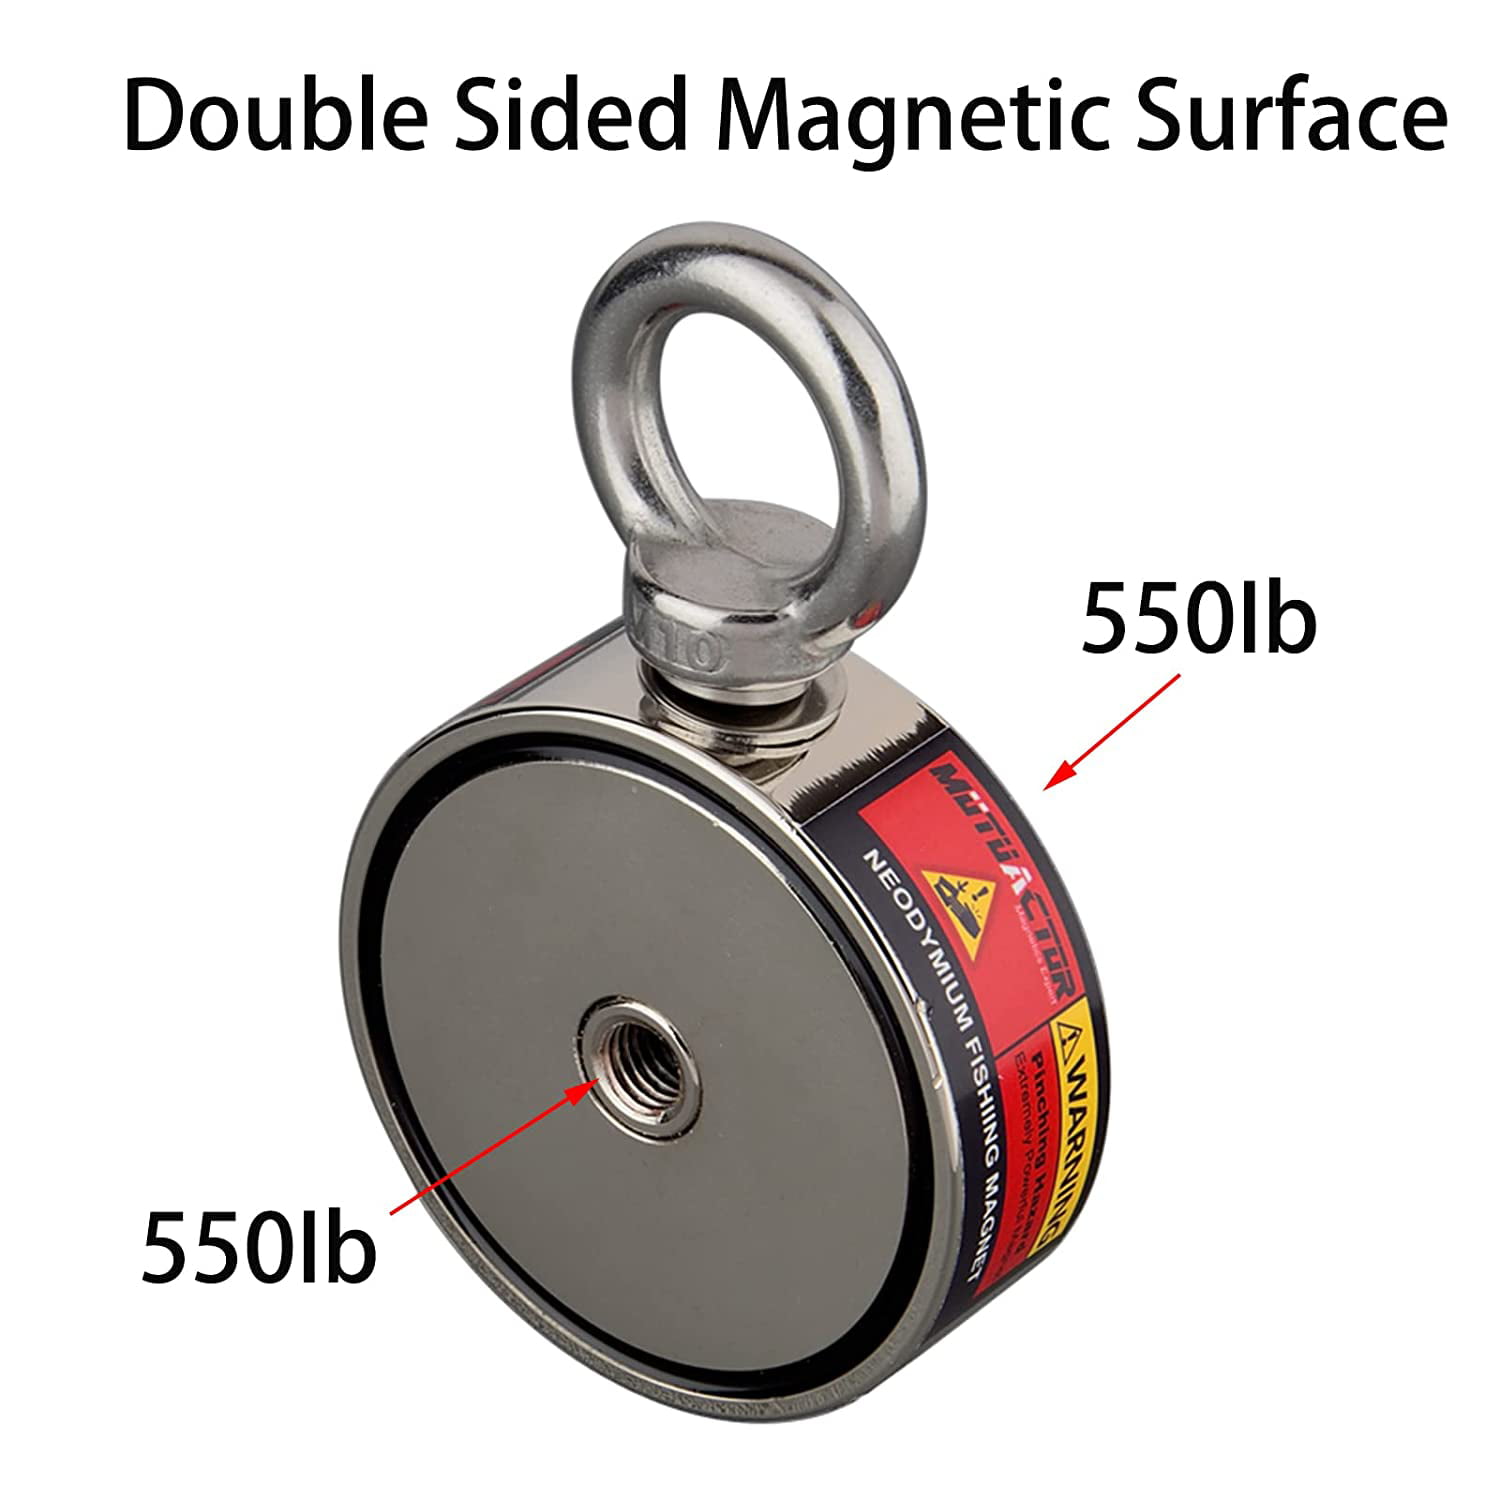 Generic MUTUACTOR Strong Fishing Magnets Combined 700lbs Pull Force,Double Sided Retrieval Magnet N52 Neodymium Magnets Heavy Duty with